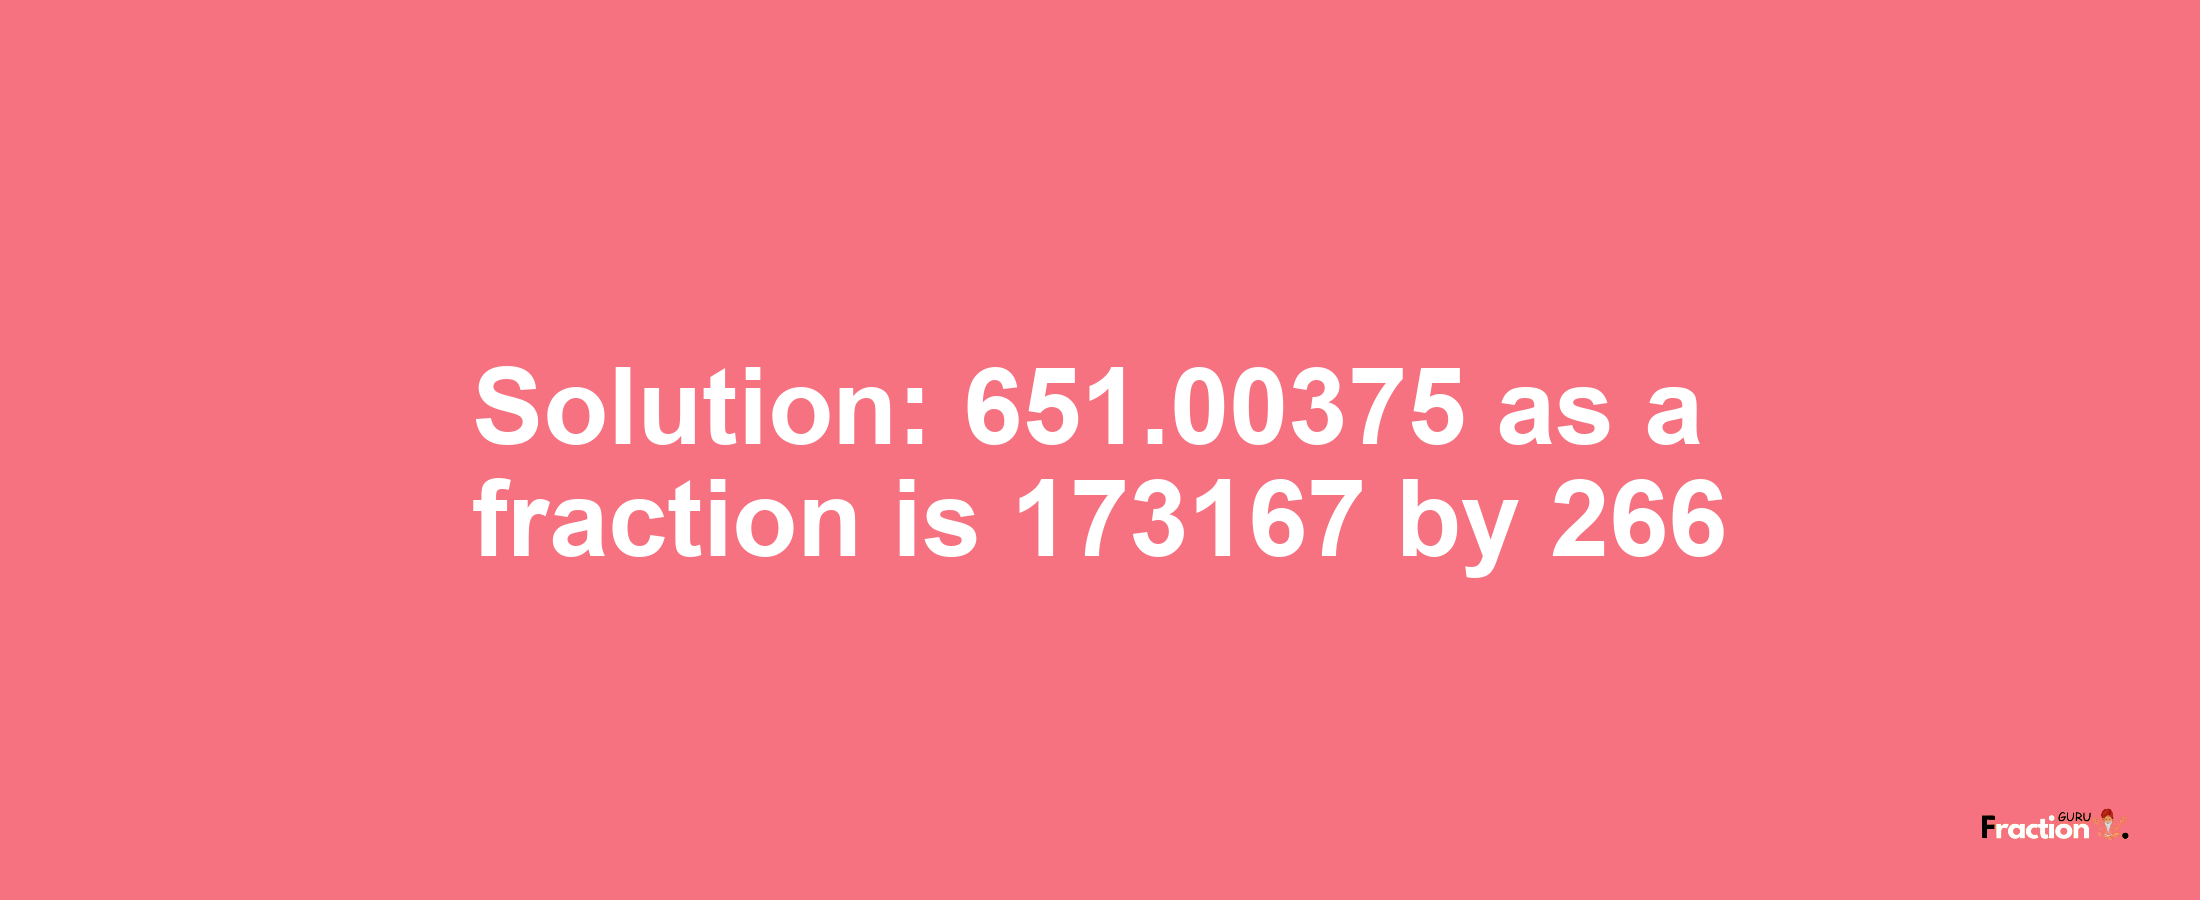 Solution:651.00375 as a fraction is 173167/266